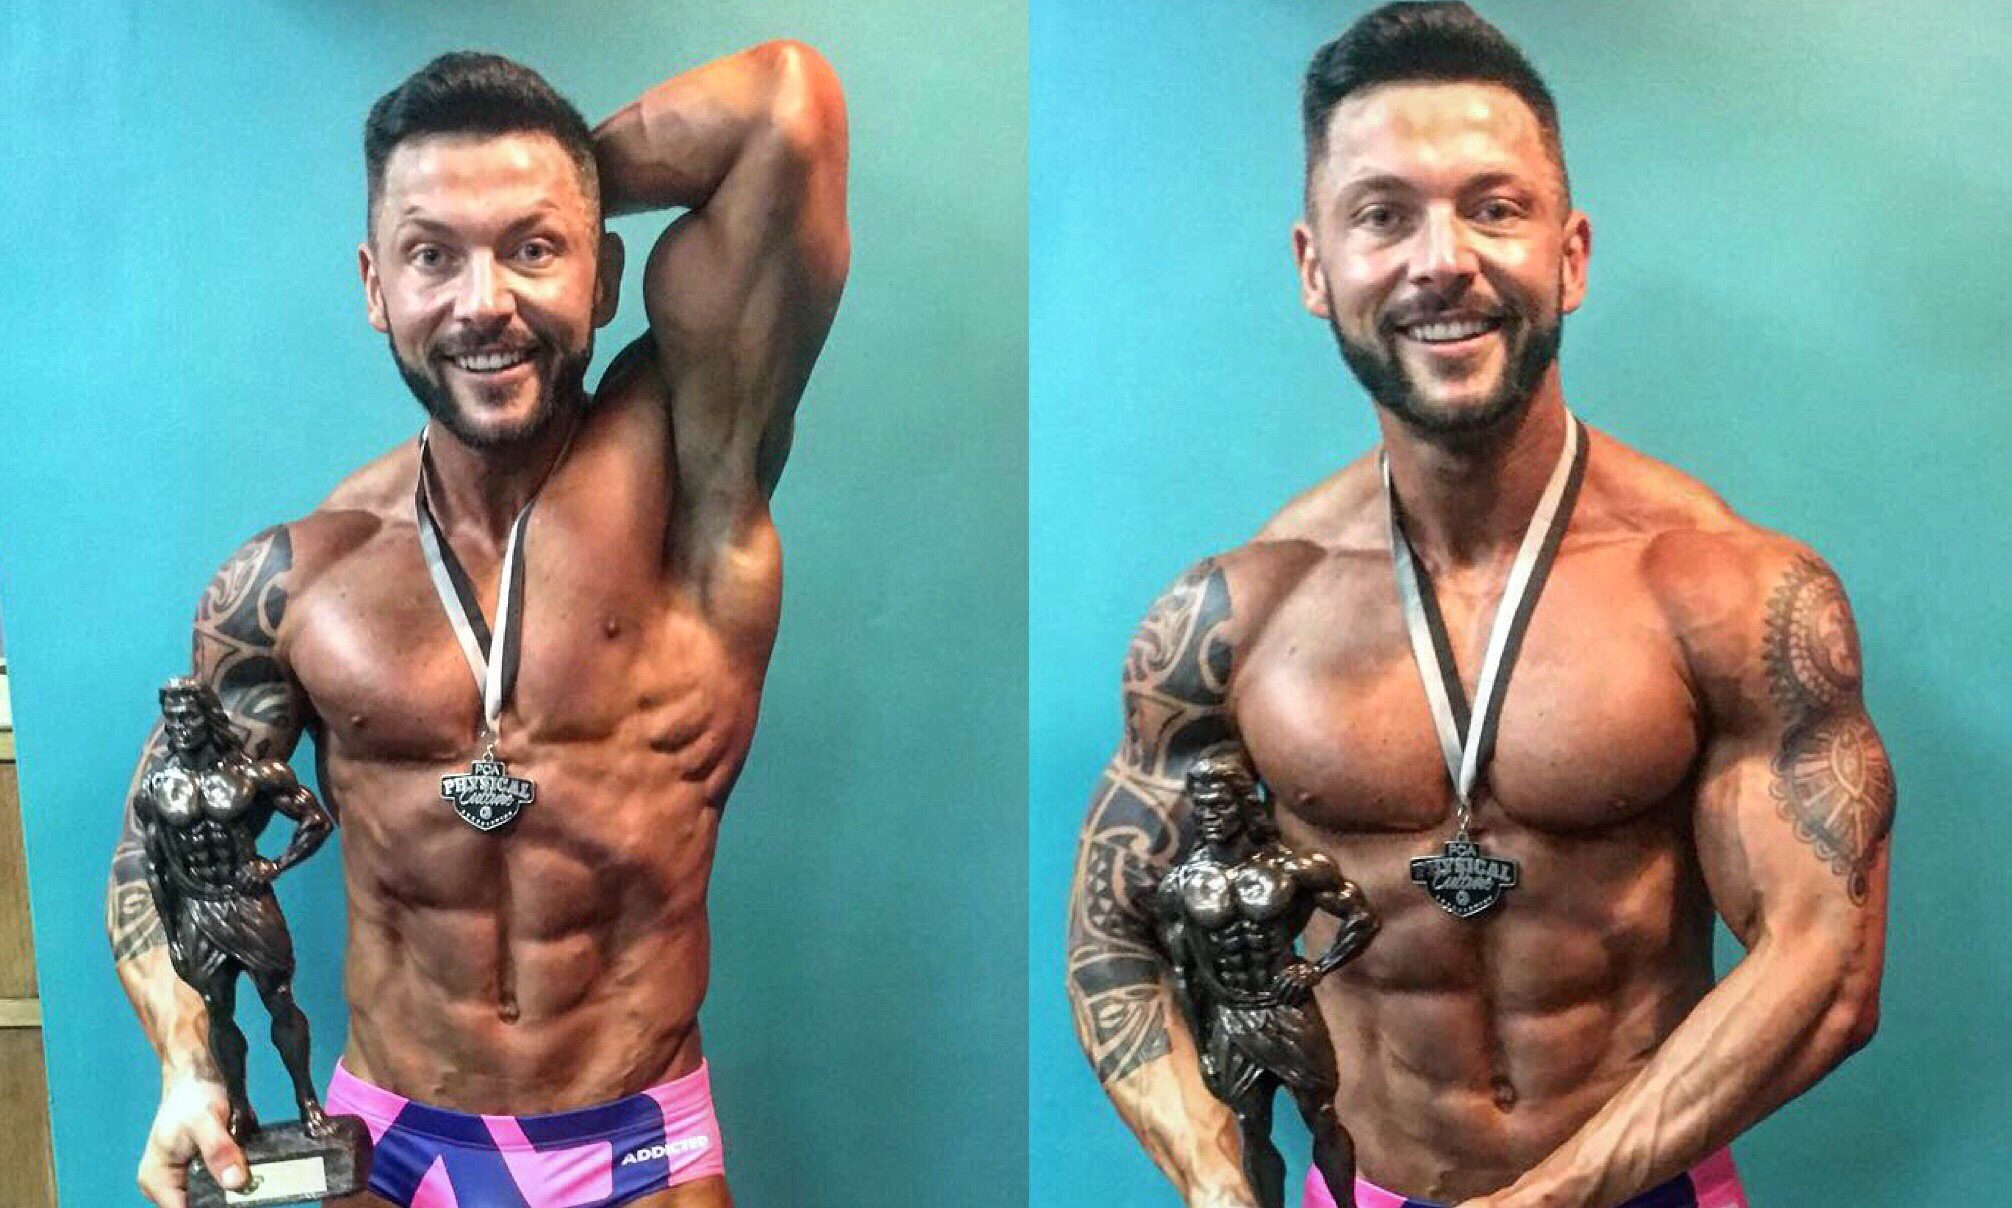 Dane poses with his medal and trophy from the PCA bodybuilding championships in Hull.